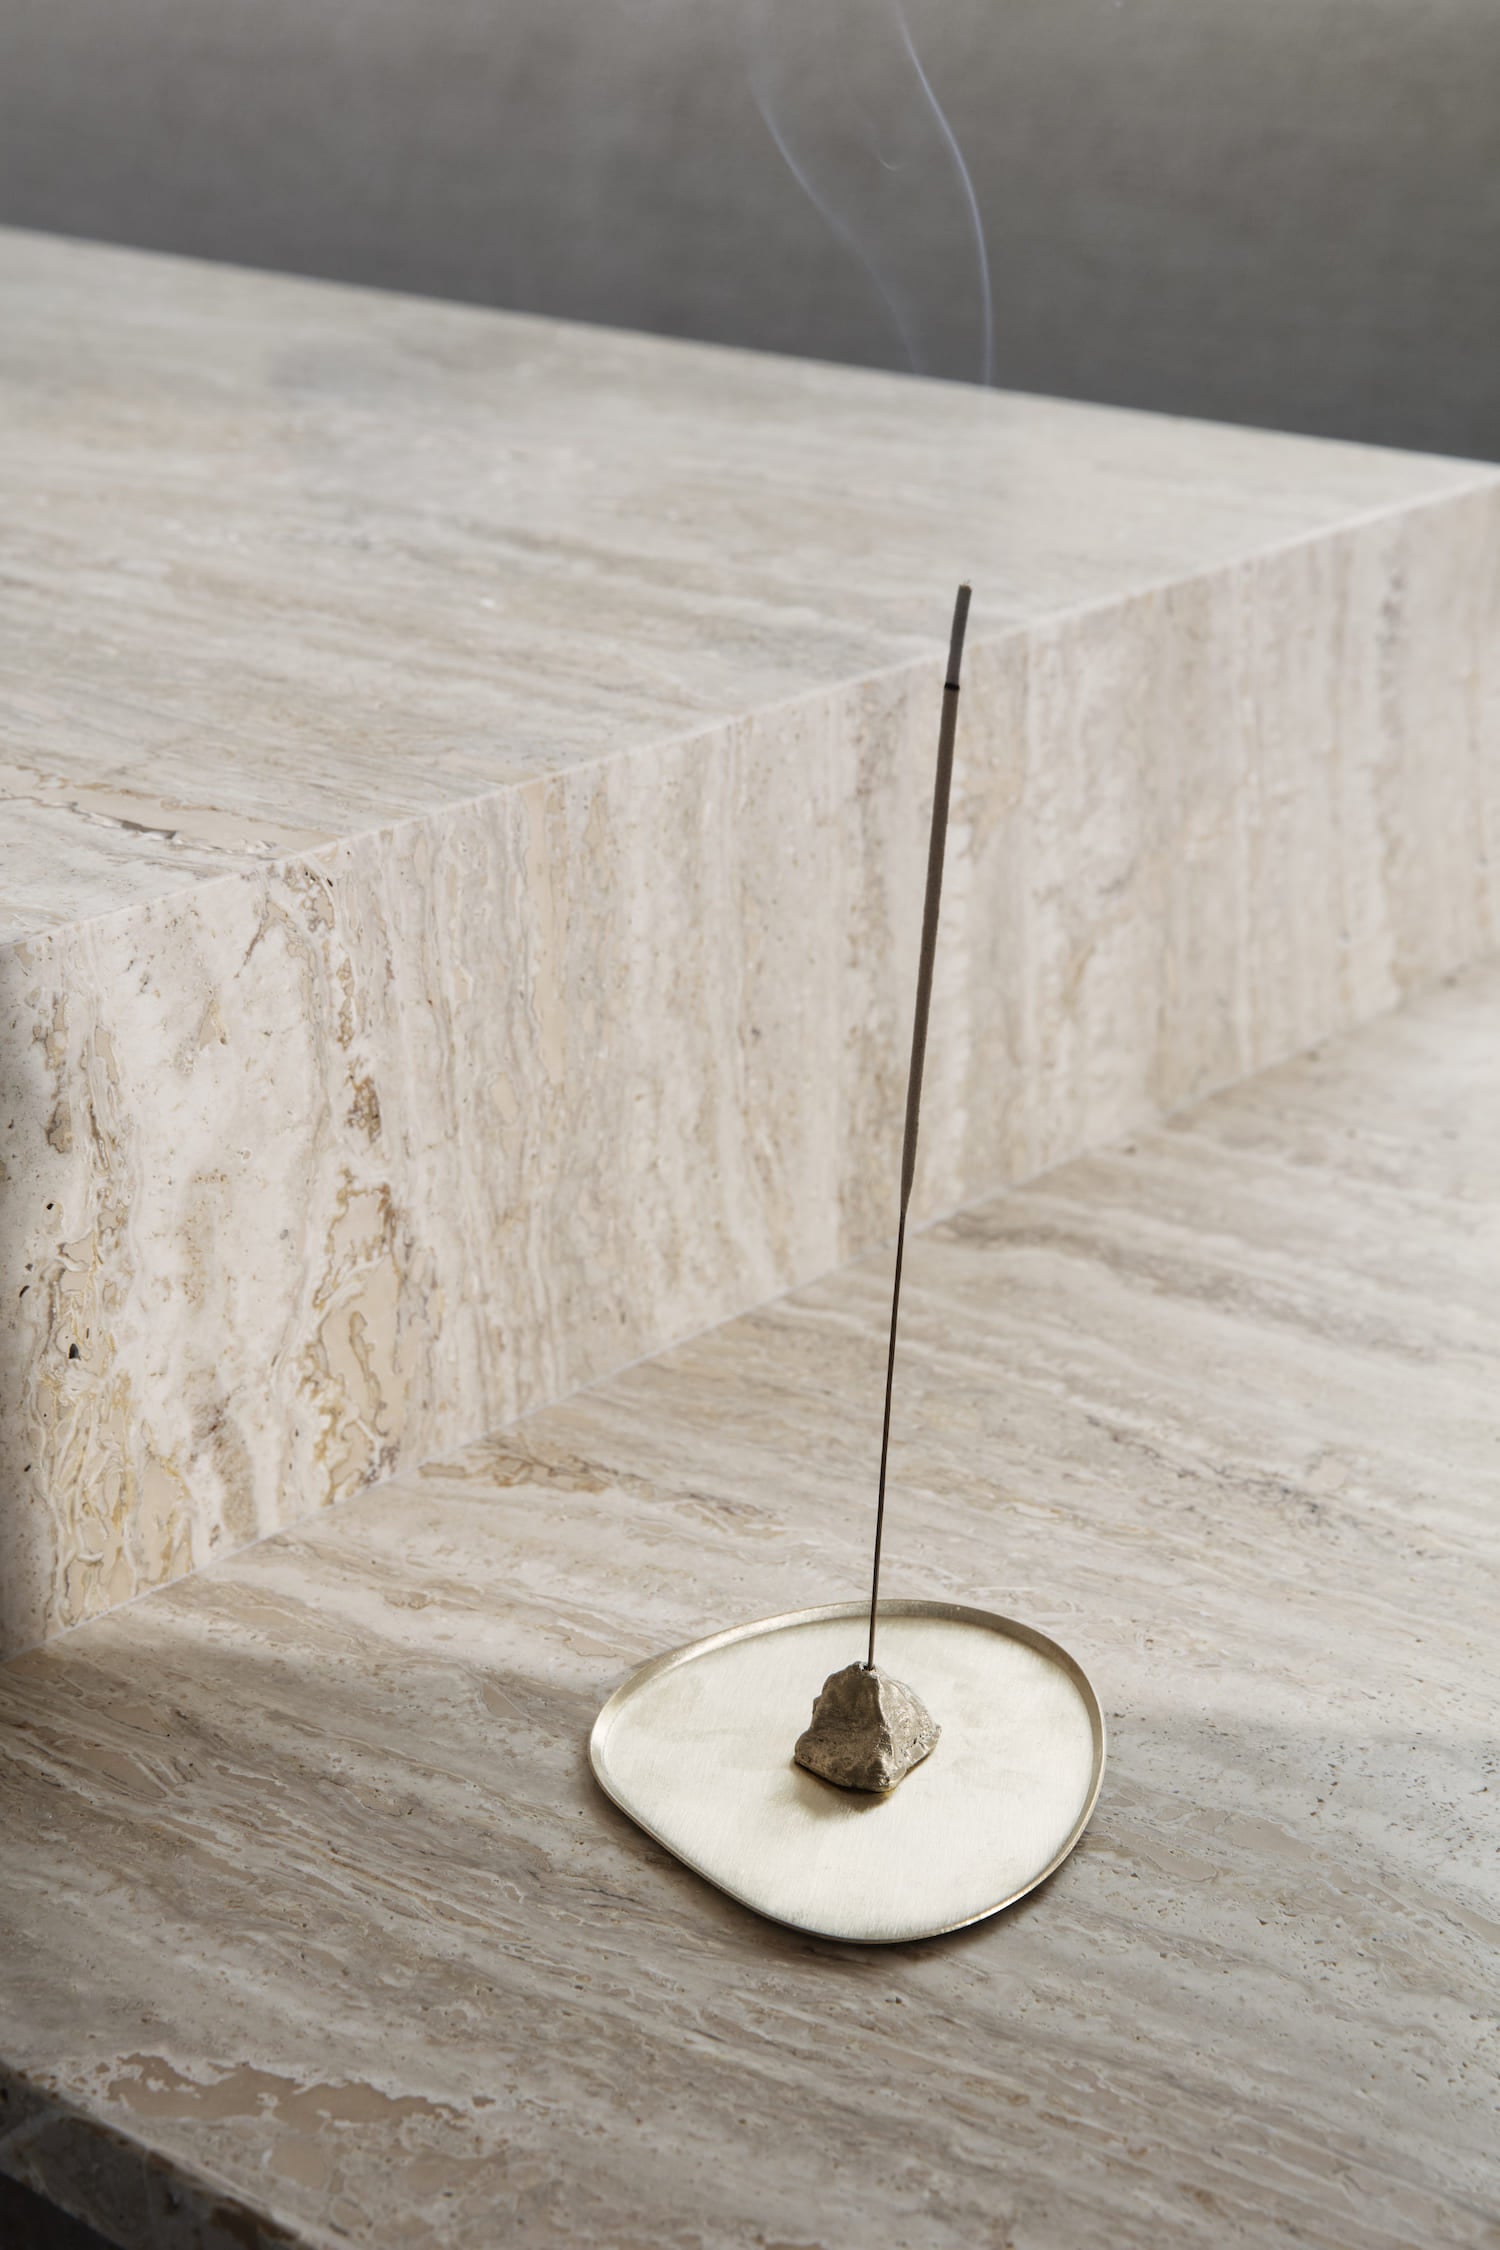 Stone Incense Burner. Minimalist incense burner made from cast stone over a rounded tray in matte brass designed to add tranquility to everyday living. 